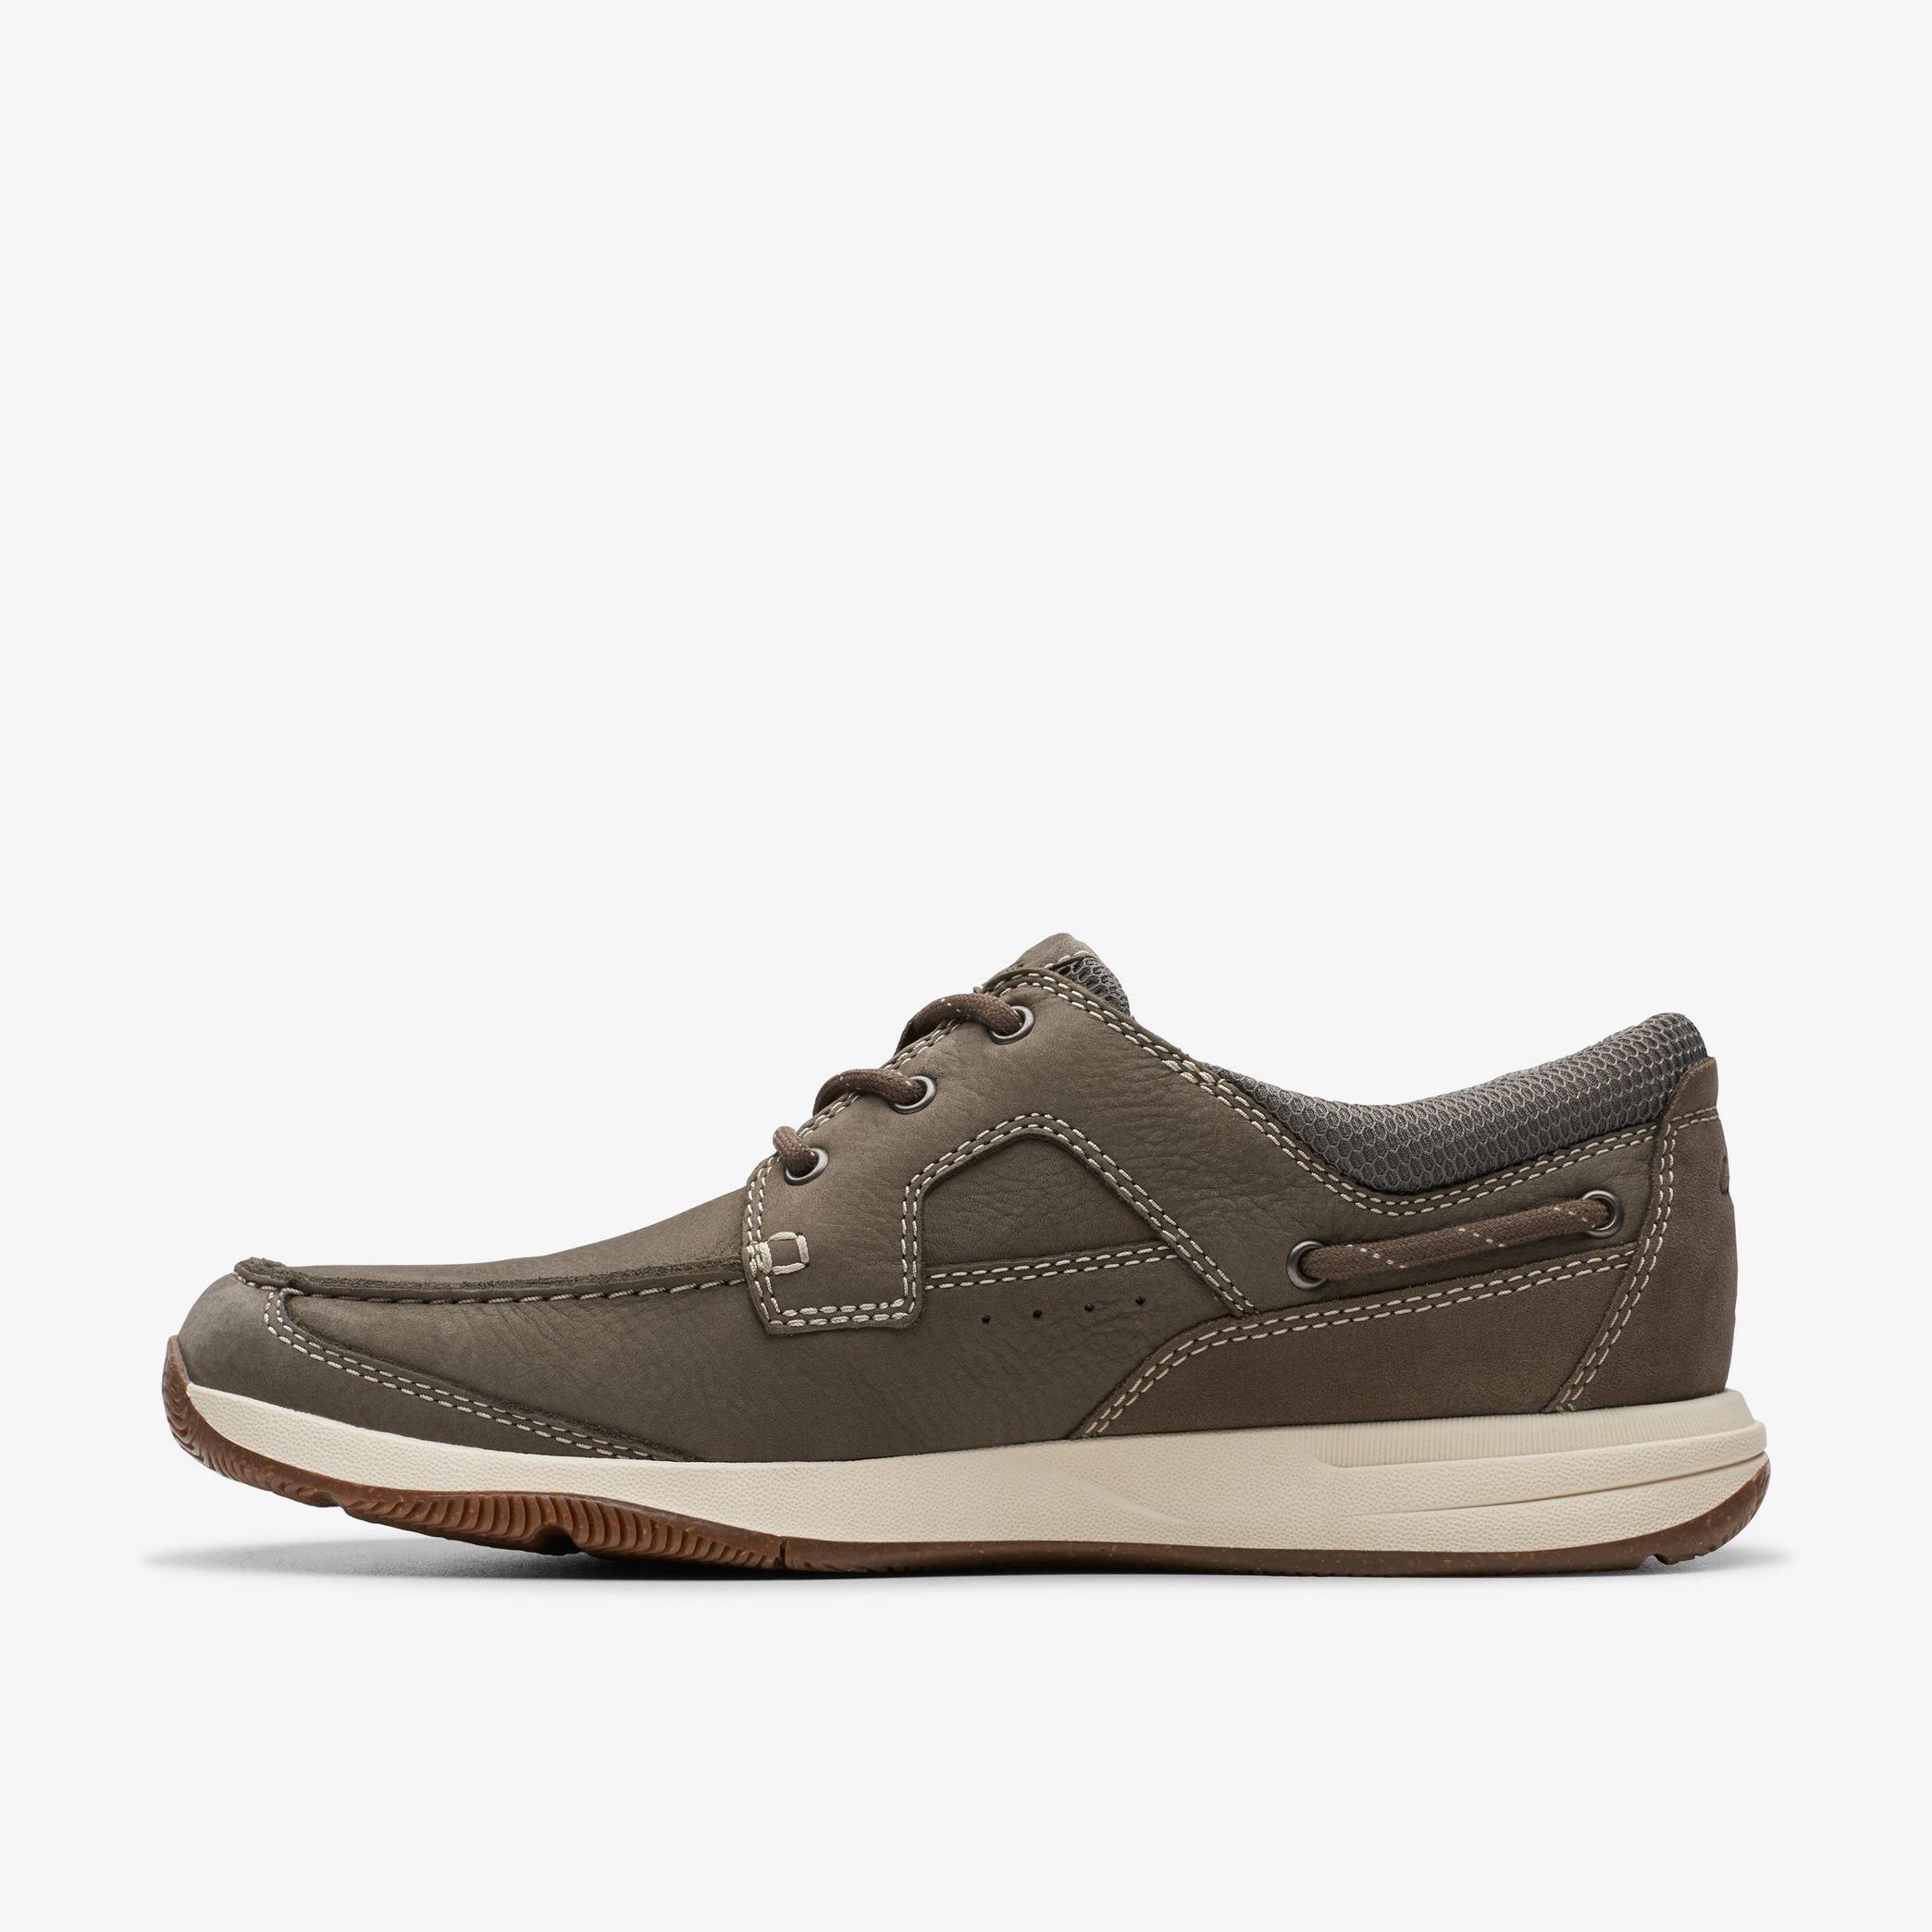 Sailview Lace Taupe Nubuck Boat Shoes, view 2 of 8